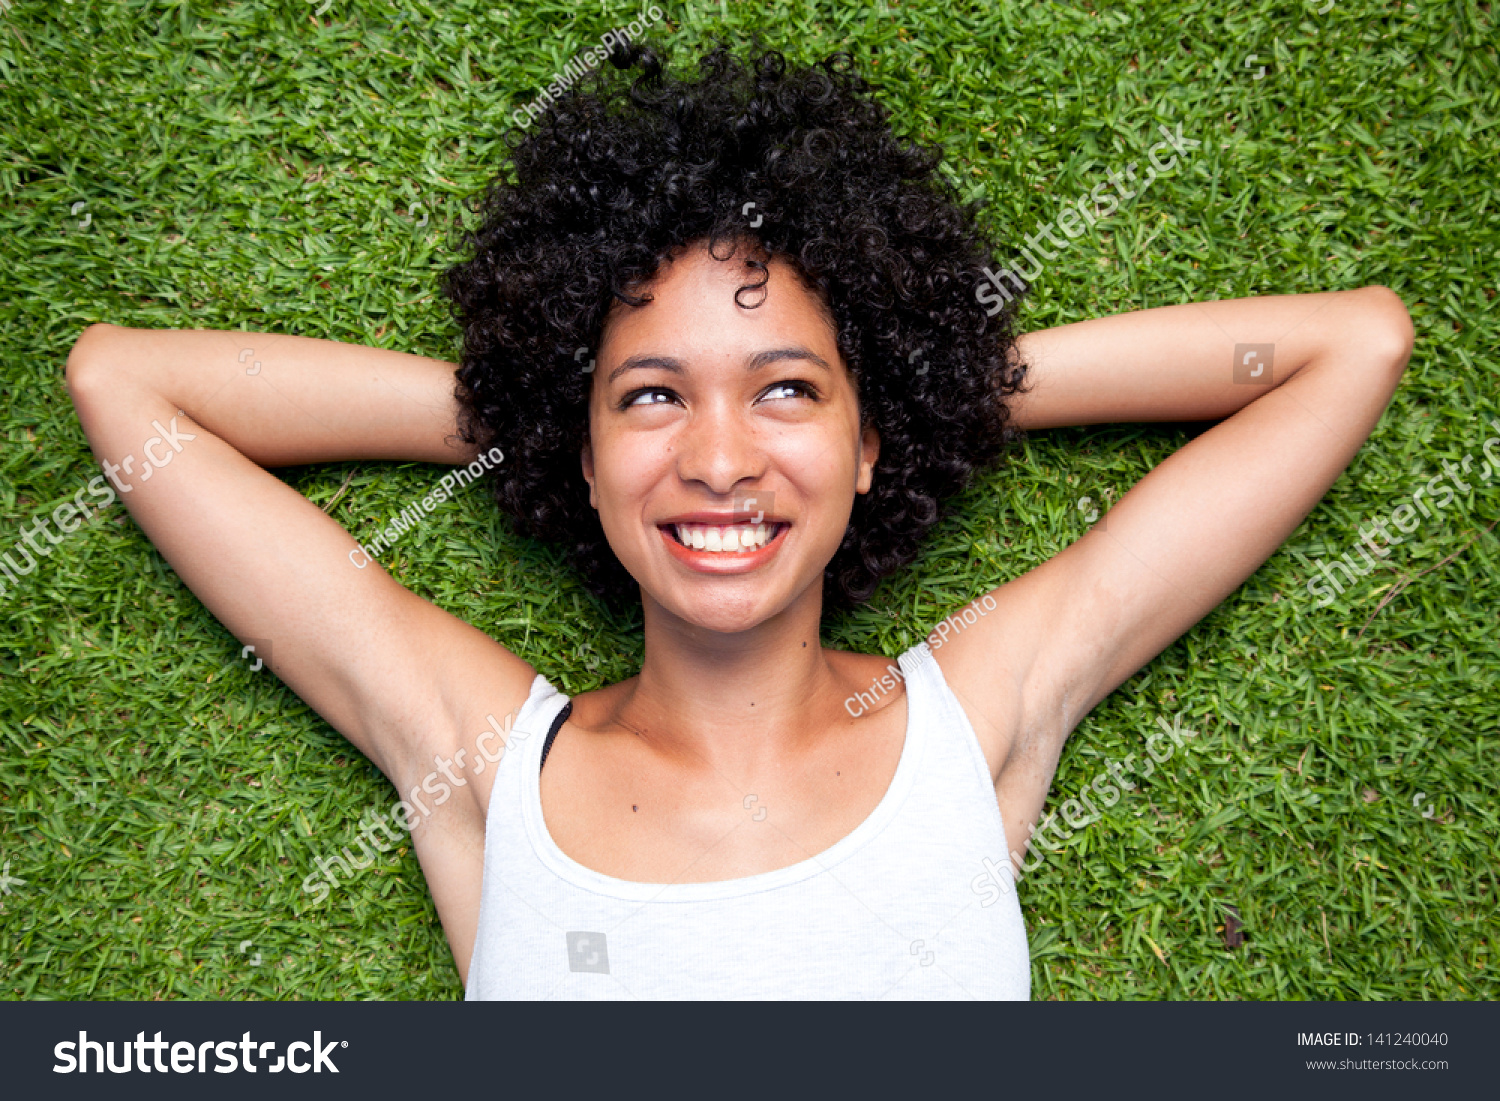 Happy Mixed Race Woman Lying Down On Green Grass With Hands Behind Her